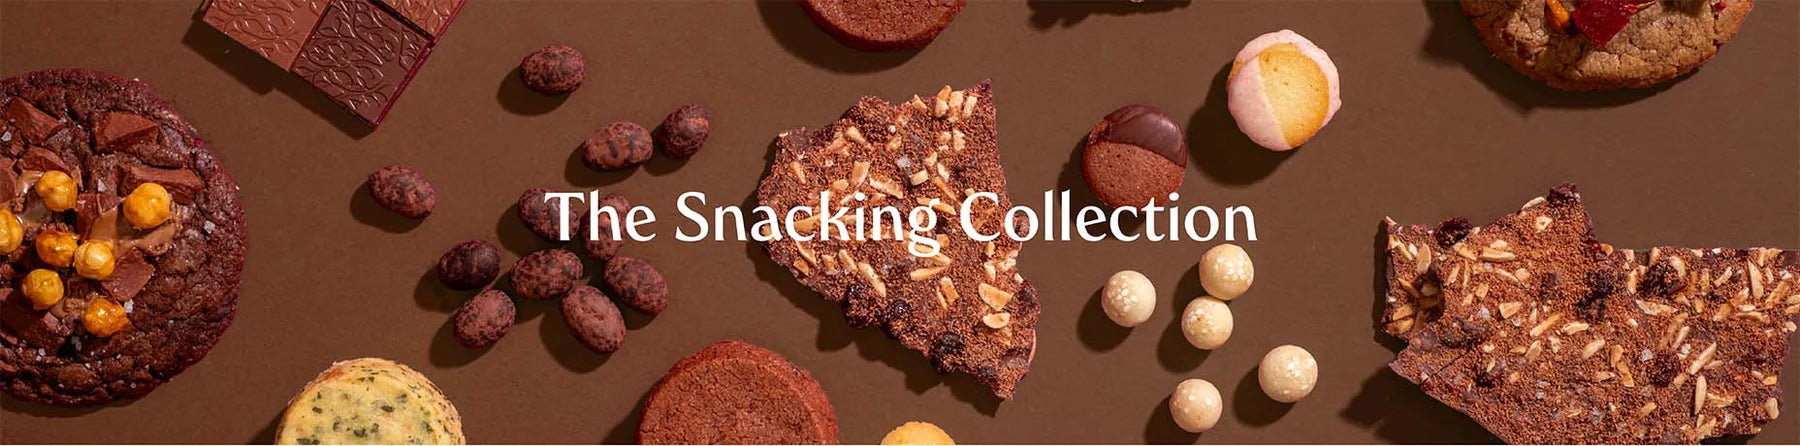 Snacking Cacao Nibs